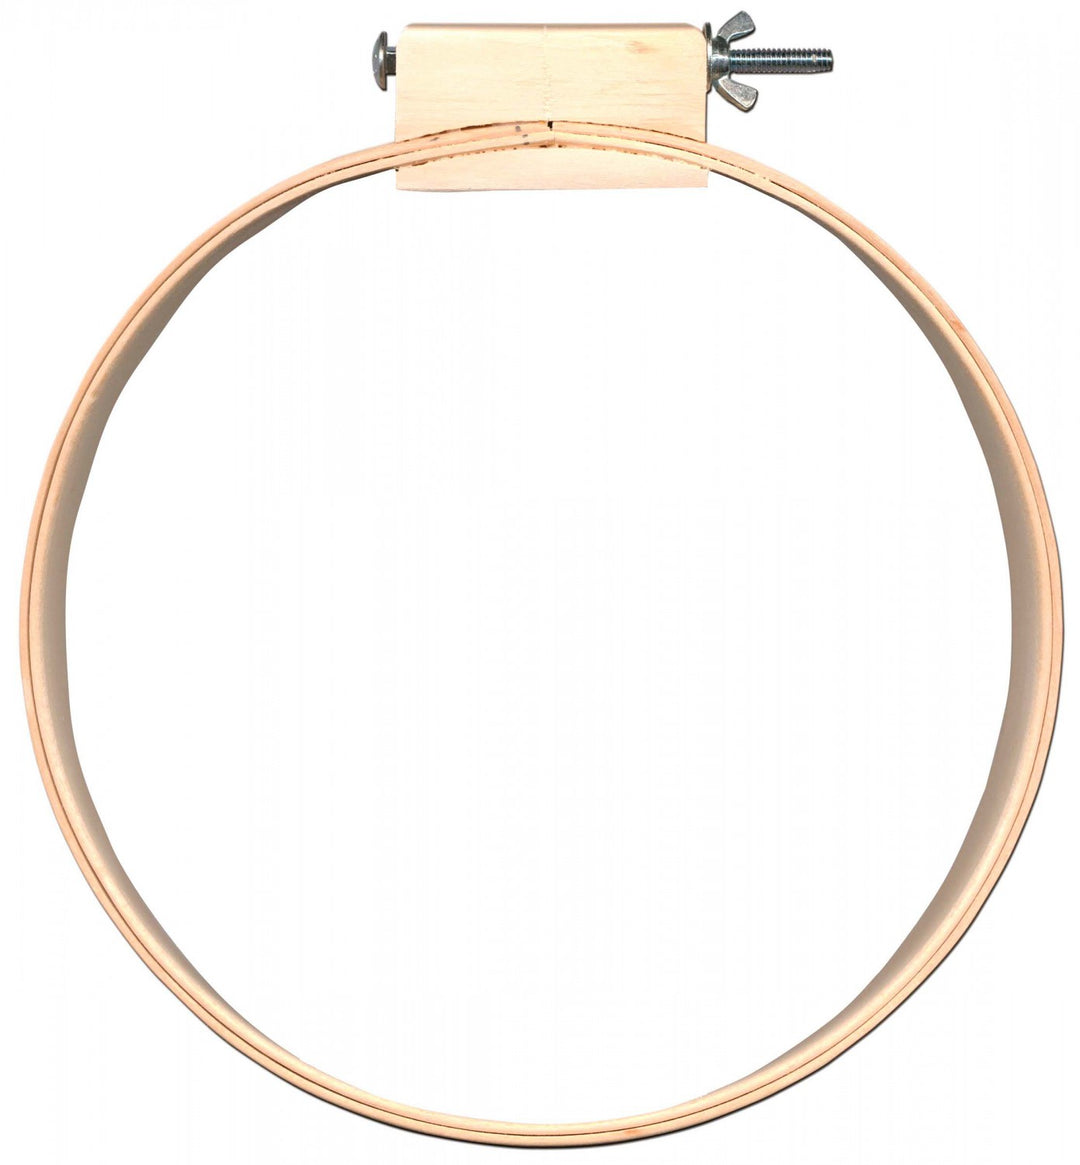 Frank A Edmunds 14in Wood Quilting Hoop (4713972334637)